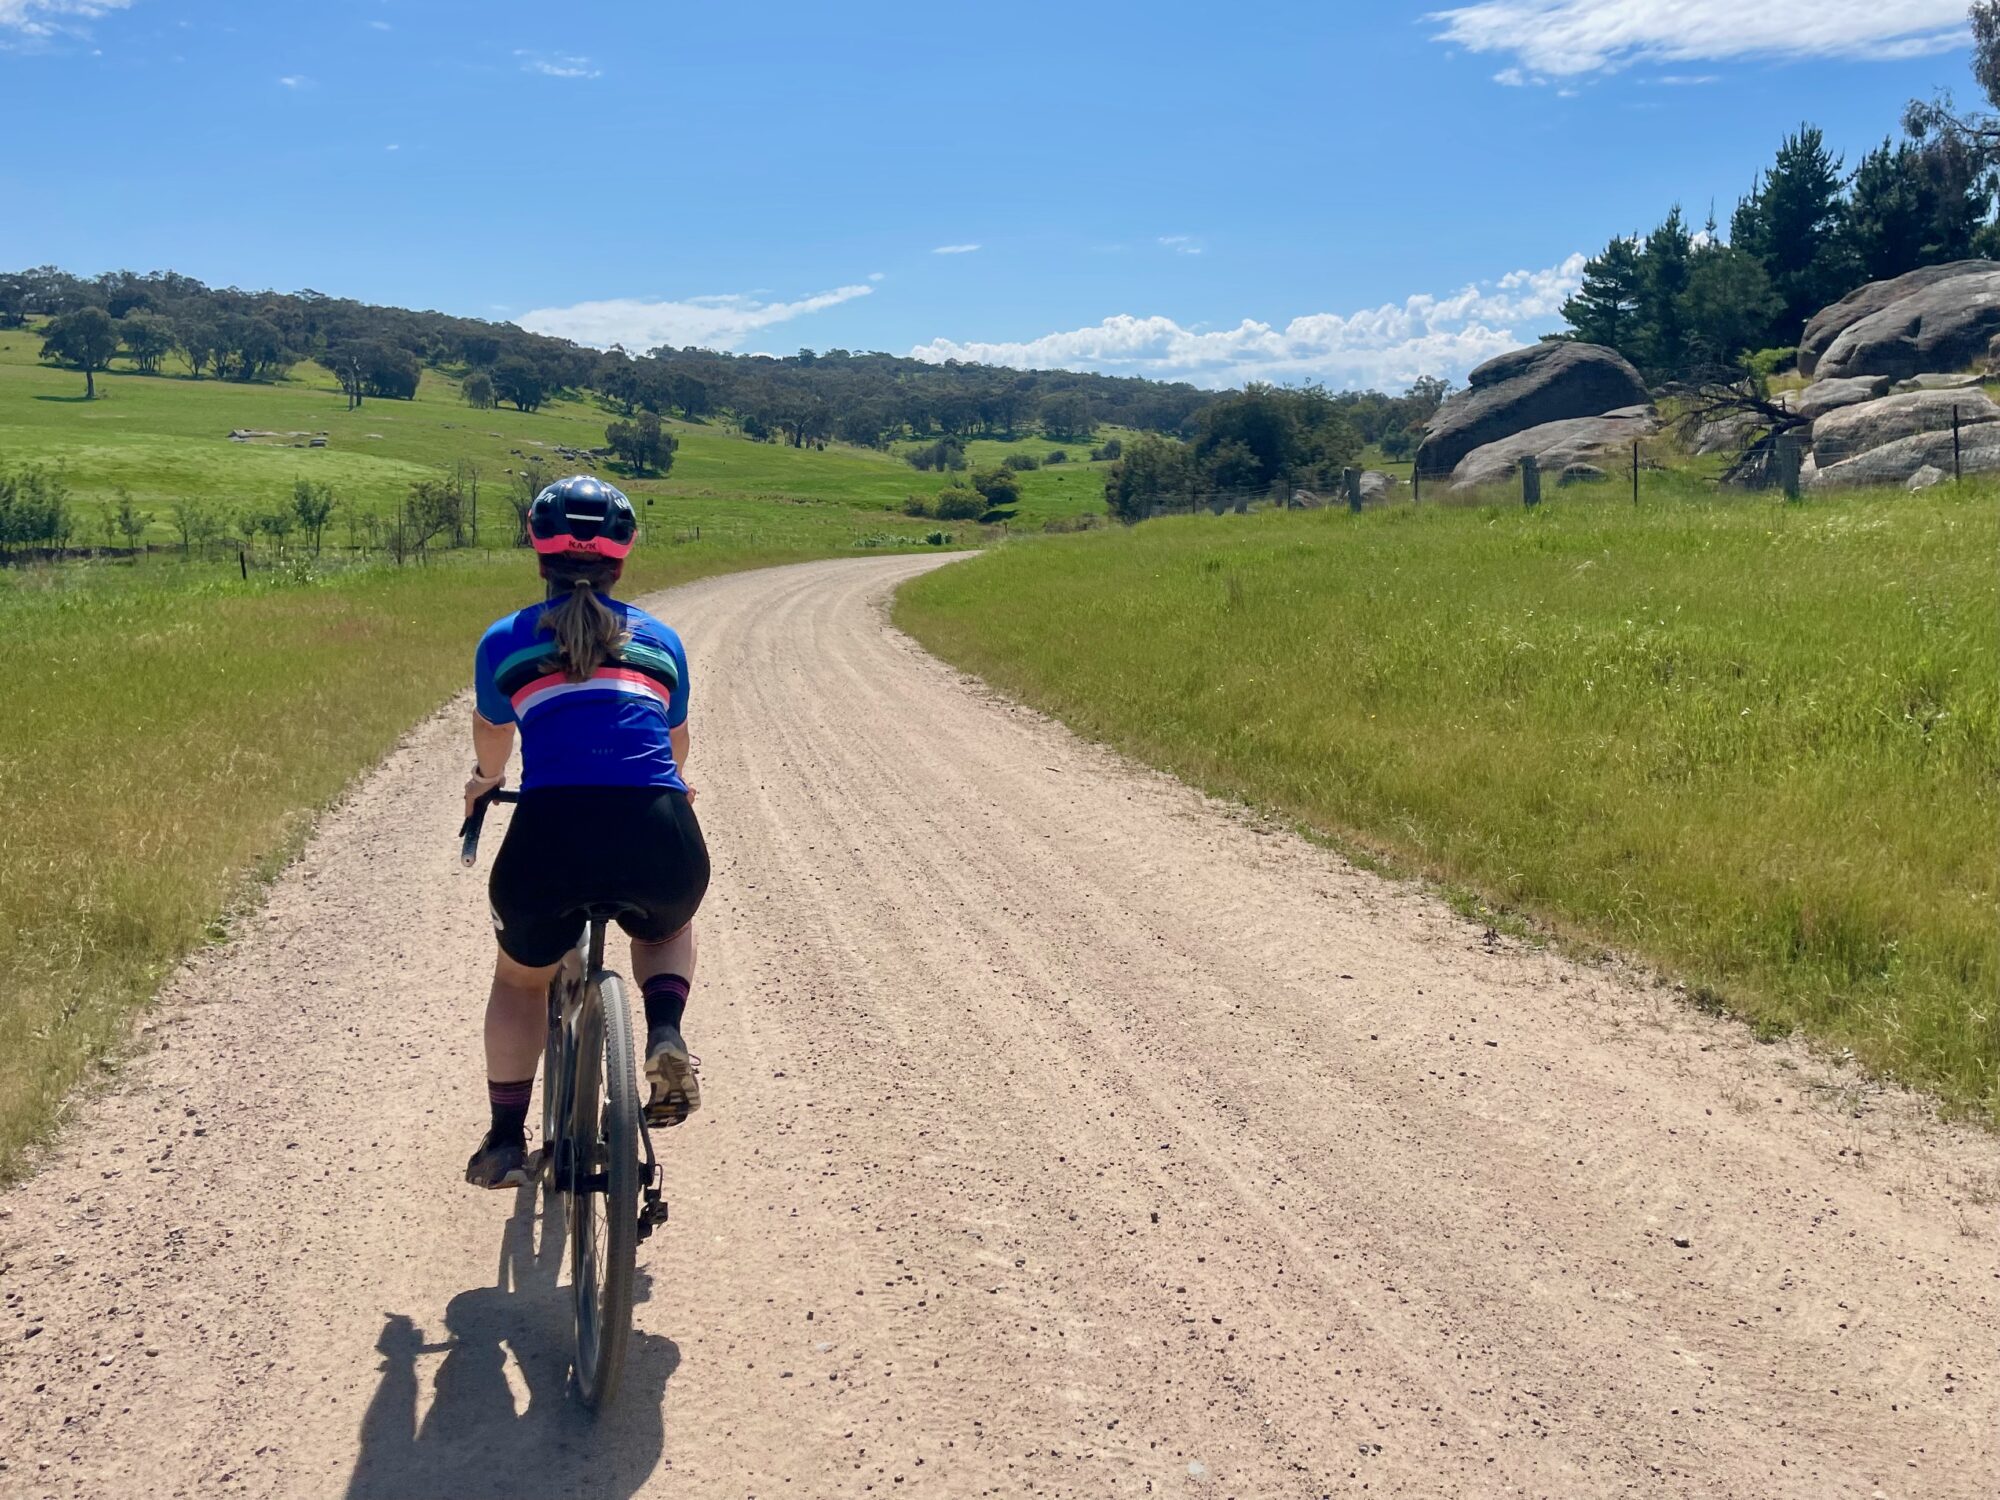 A female cyclist riding under blue skies on a smooth gravel road that is winding through open farmland and large boulders on the side of the road with native bushland in the background 